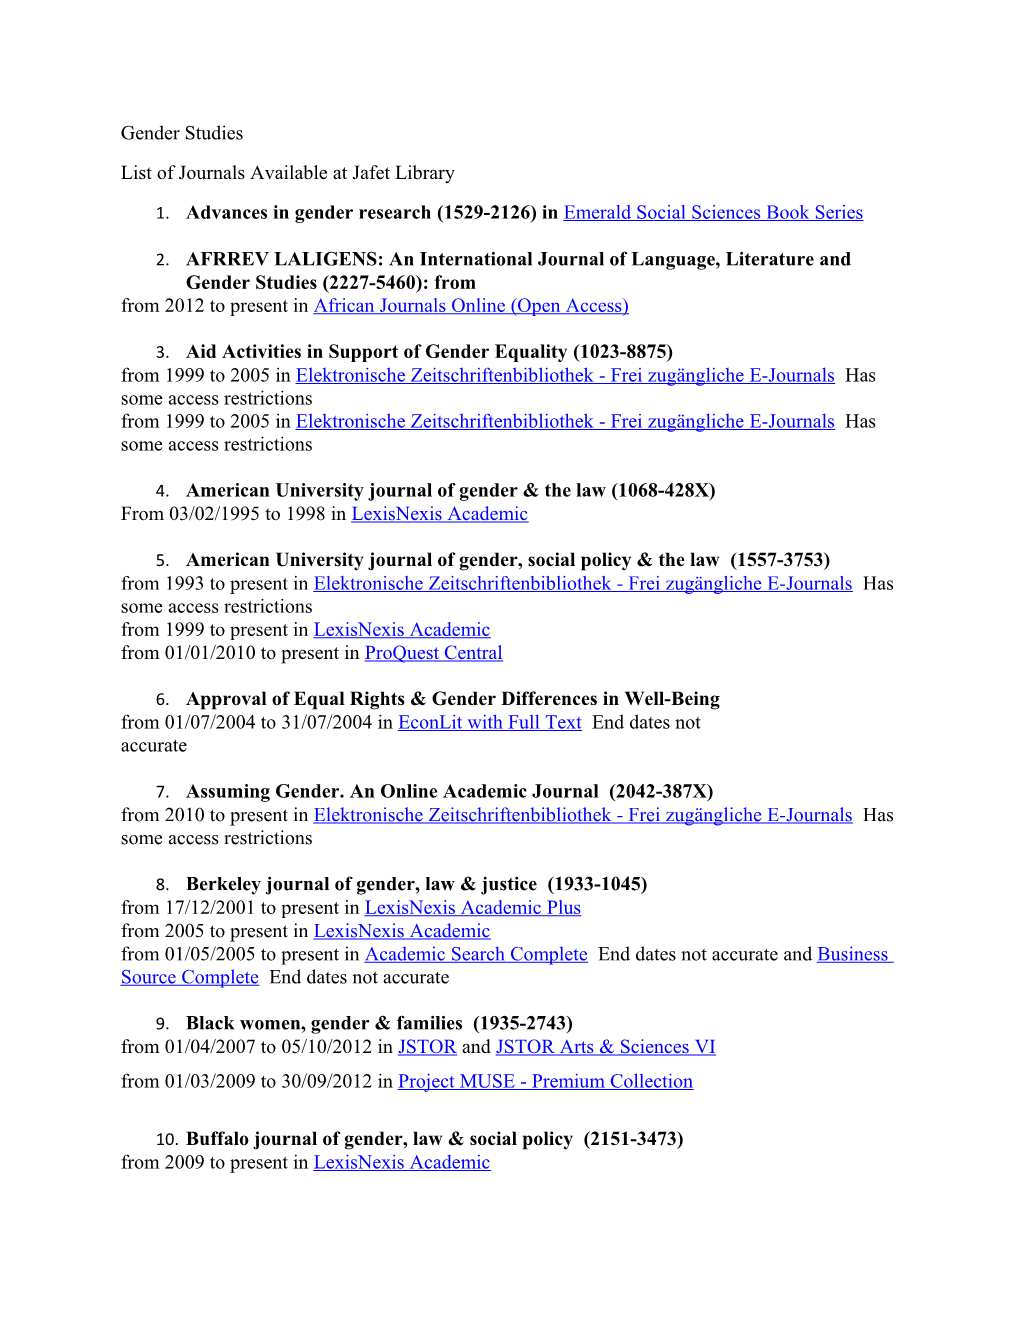 List of Journals Available at Jafet Library